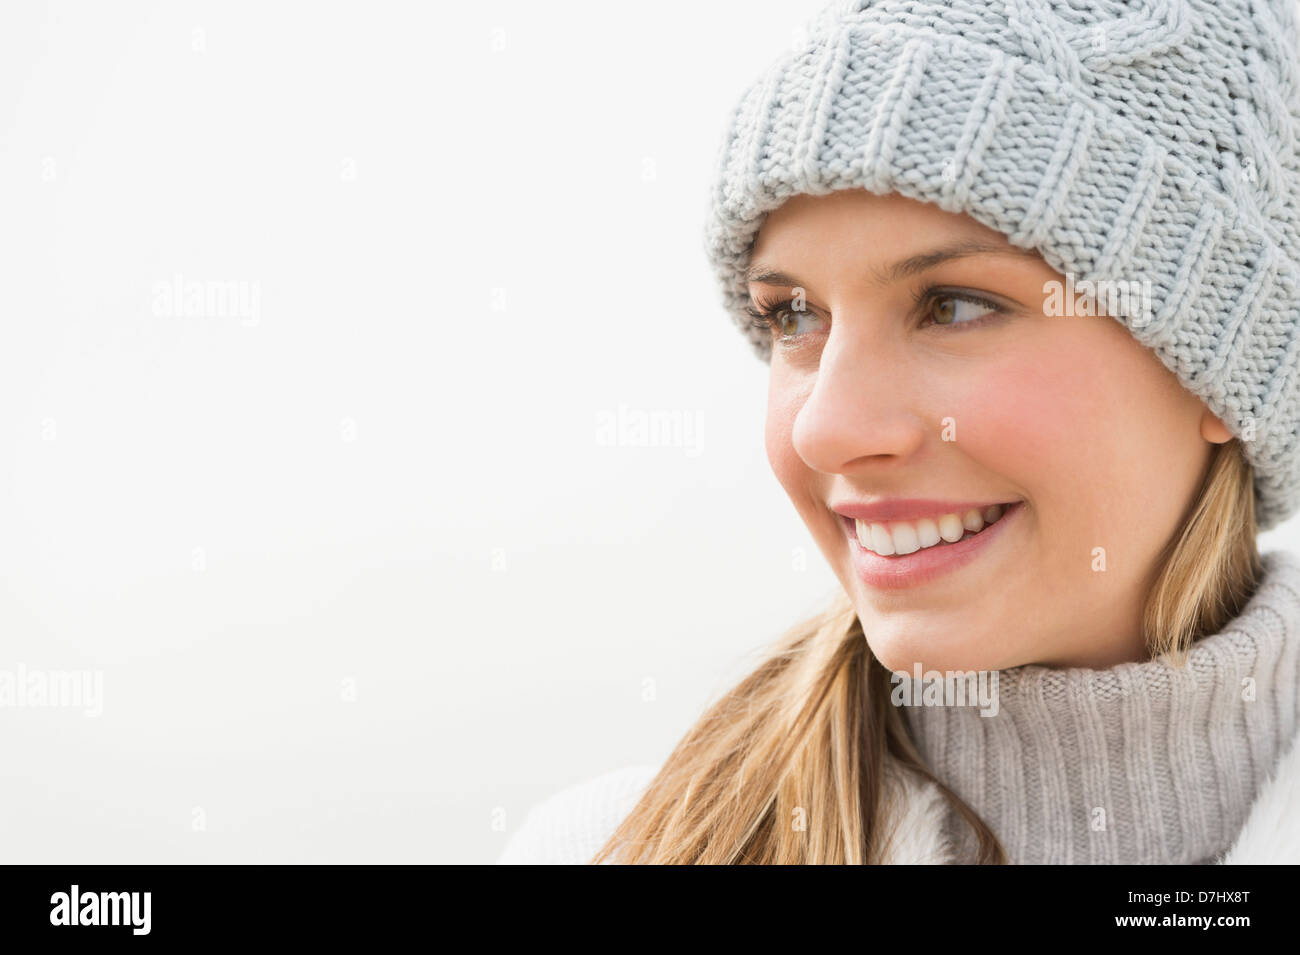 Portrait of woman in winter clothing Stock Photo